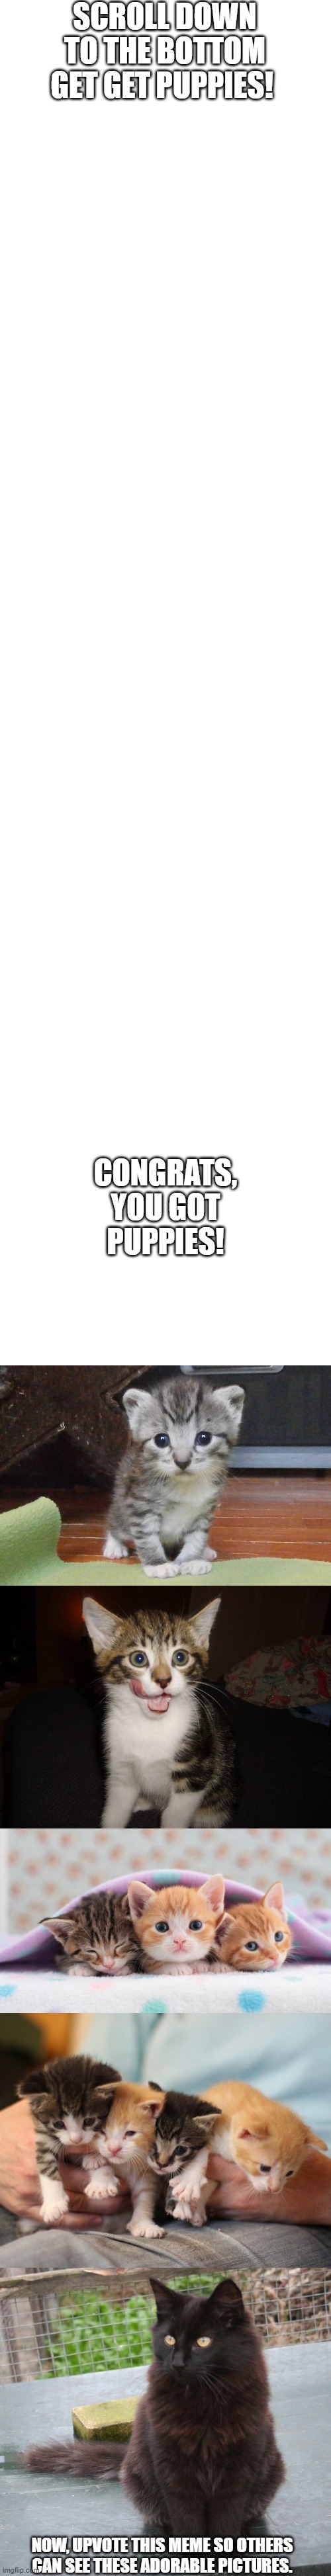 Long blank white | SCROLL DOWN TO THE BOTTOM GET GET PUPPIES! CONGRATS, YOU GOT PUPPIES! NOW, UPVOTE THIS MEME SO OTHERS CAN SEE THESE ADORABLE PICTURES. | image tagged in long blank white,dogs,puppies | made w/ Imgflip meme maker